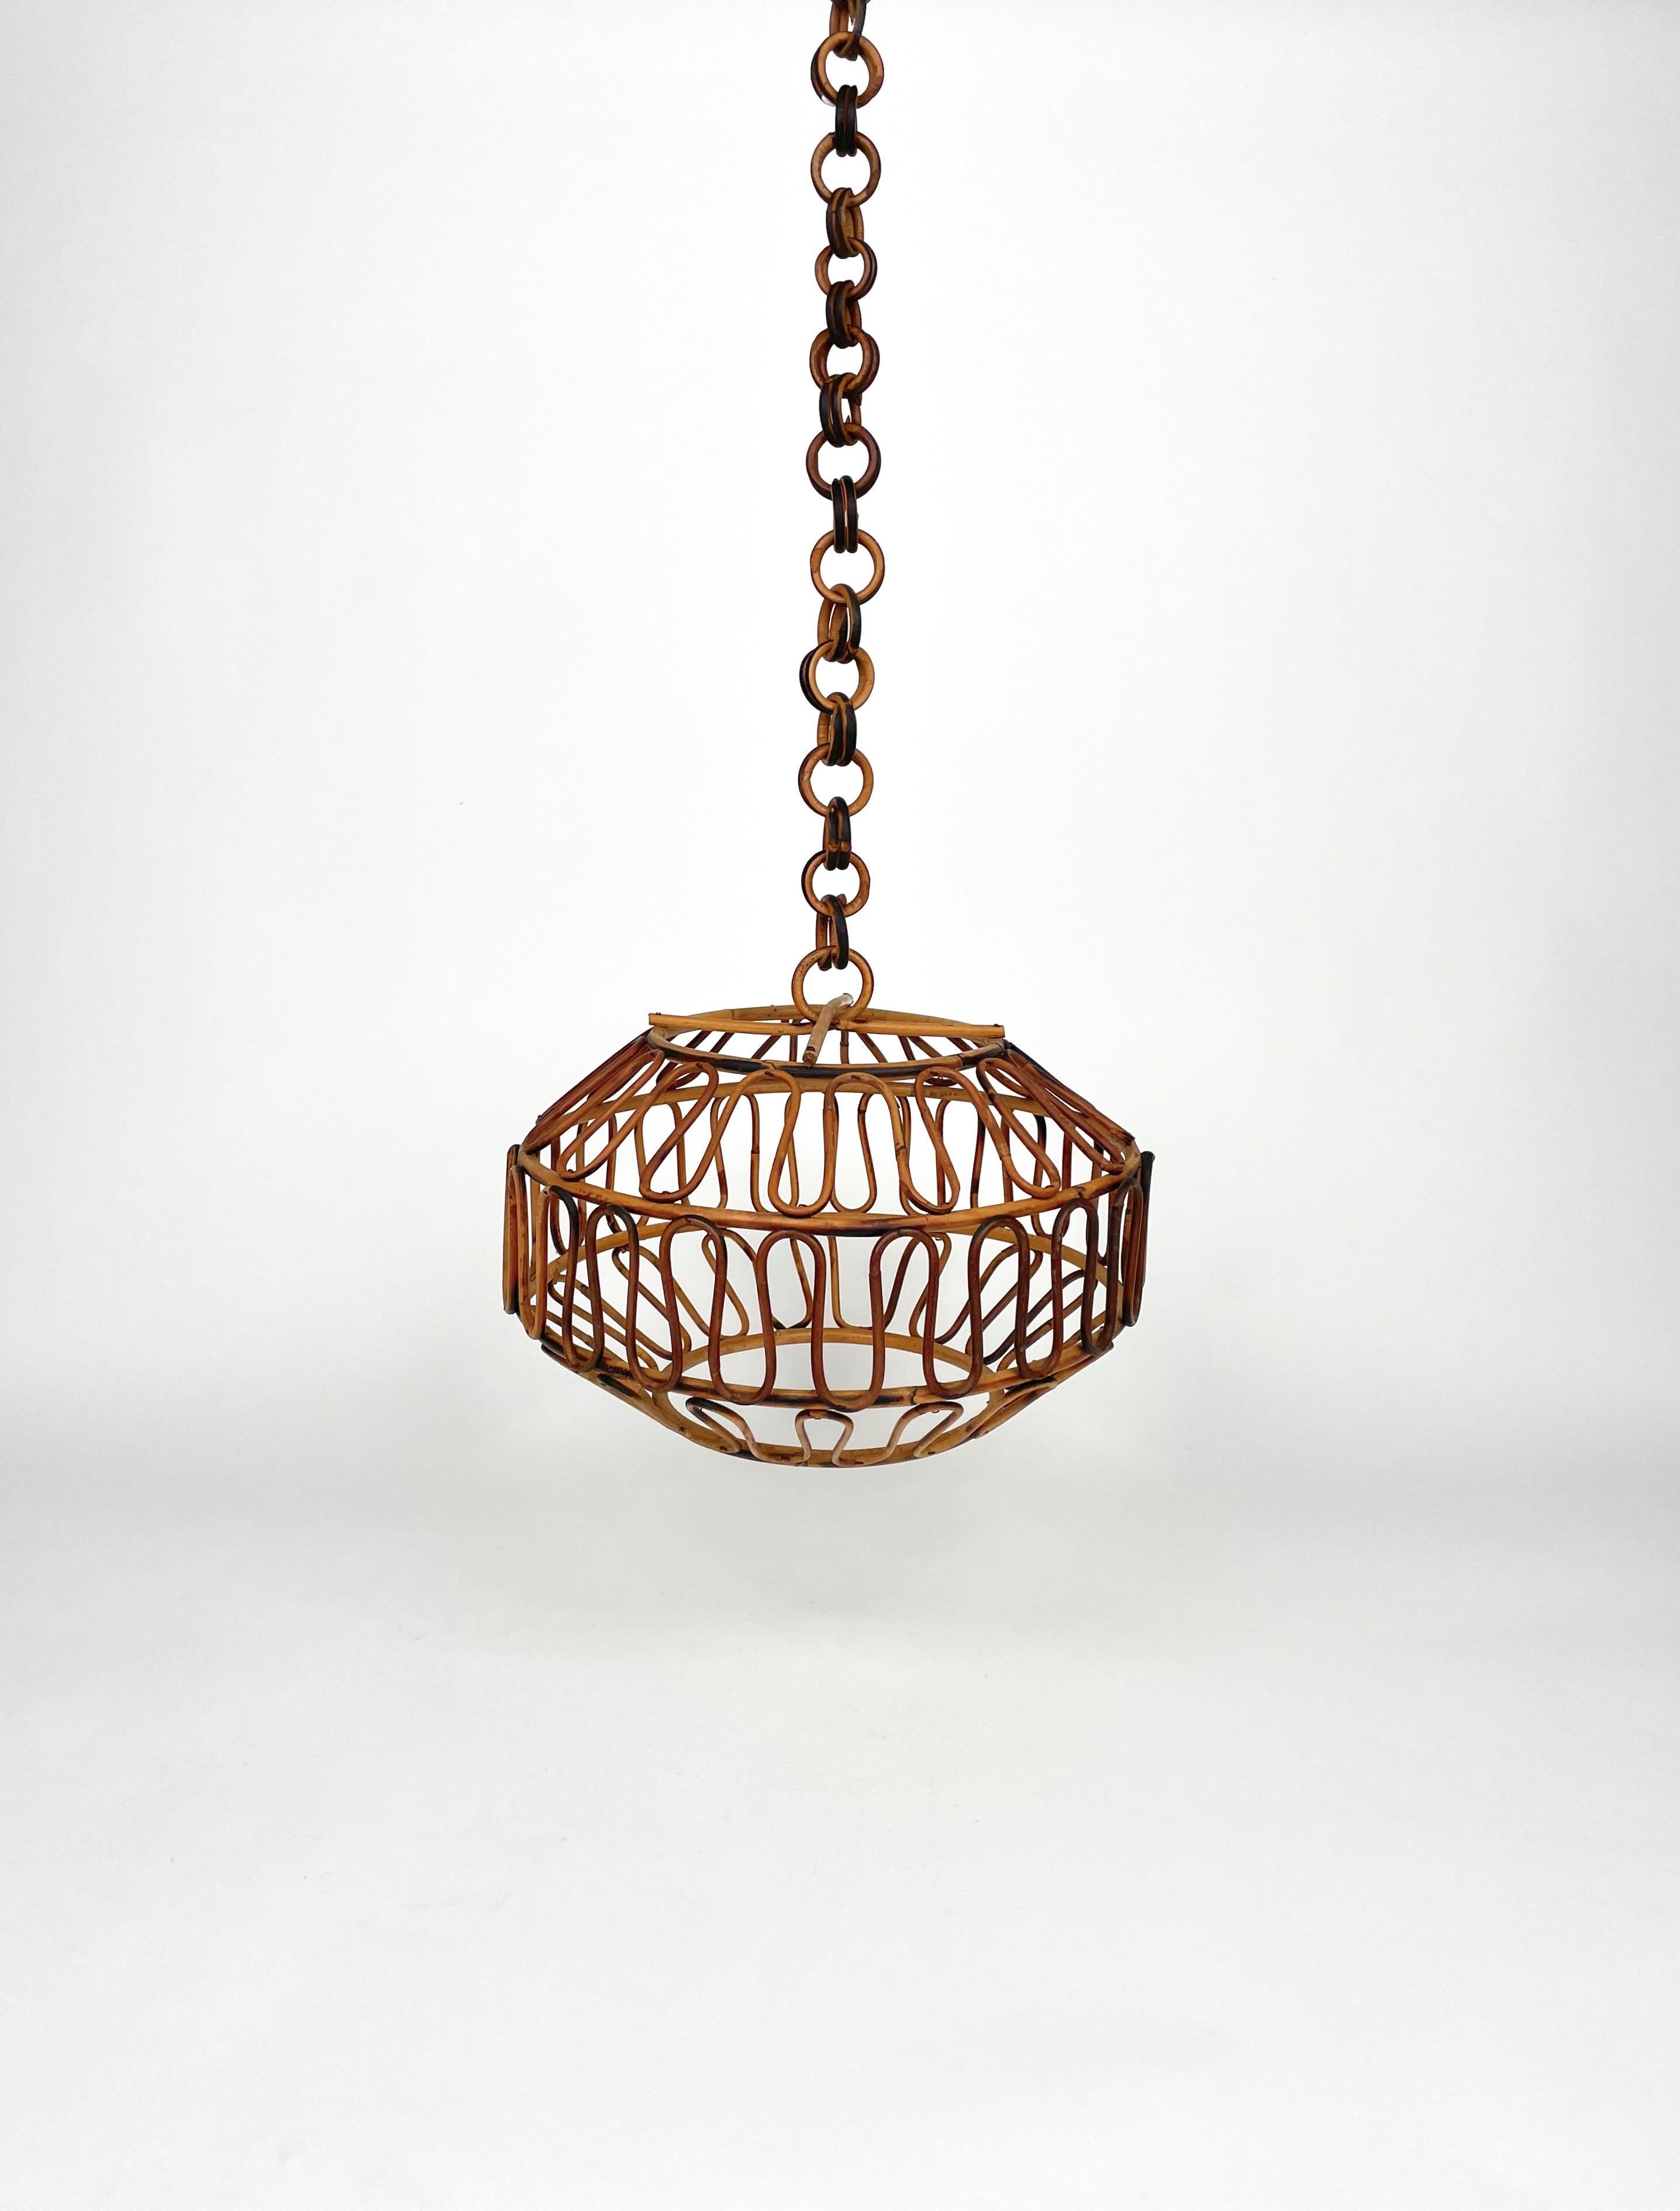 Mid-Century Modern Chandelier Pendant Bamboo & Rattan, Italy, 1960s For Sale